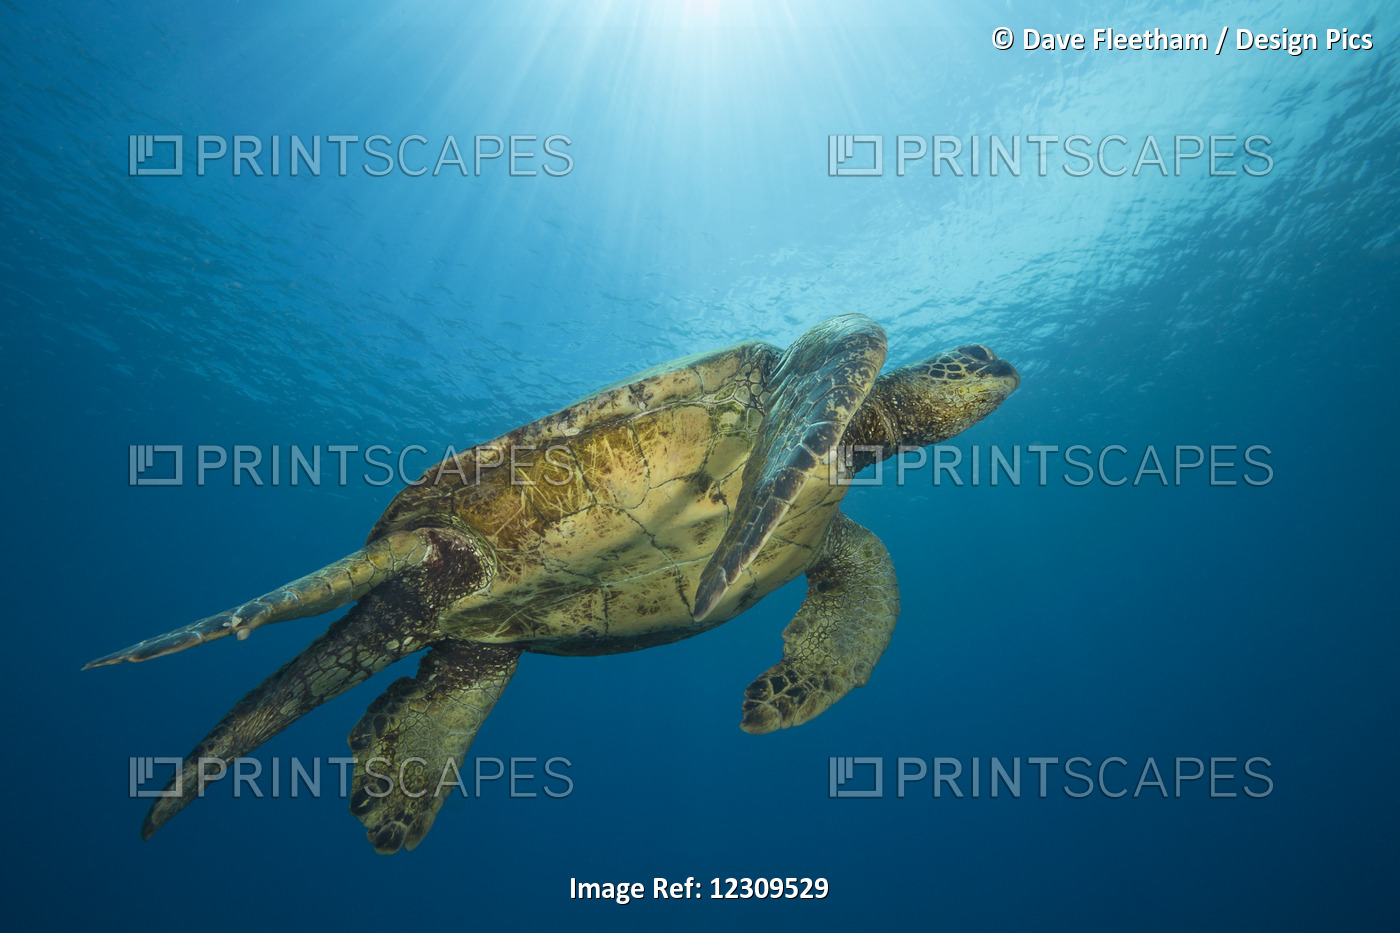 Male Green Sea Turtles (Chelonia Mydas), An Endangered Species, Have A Much ...